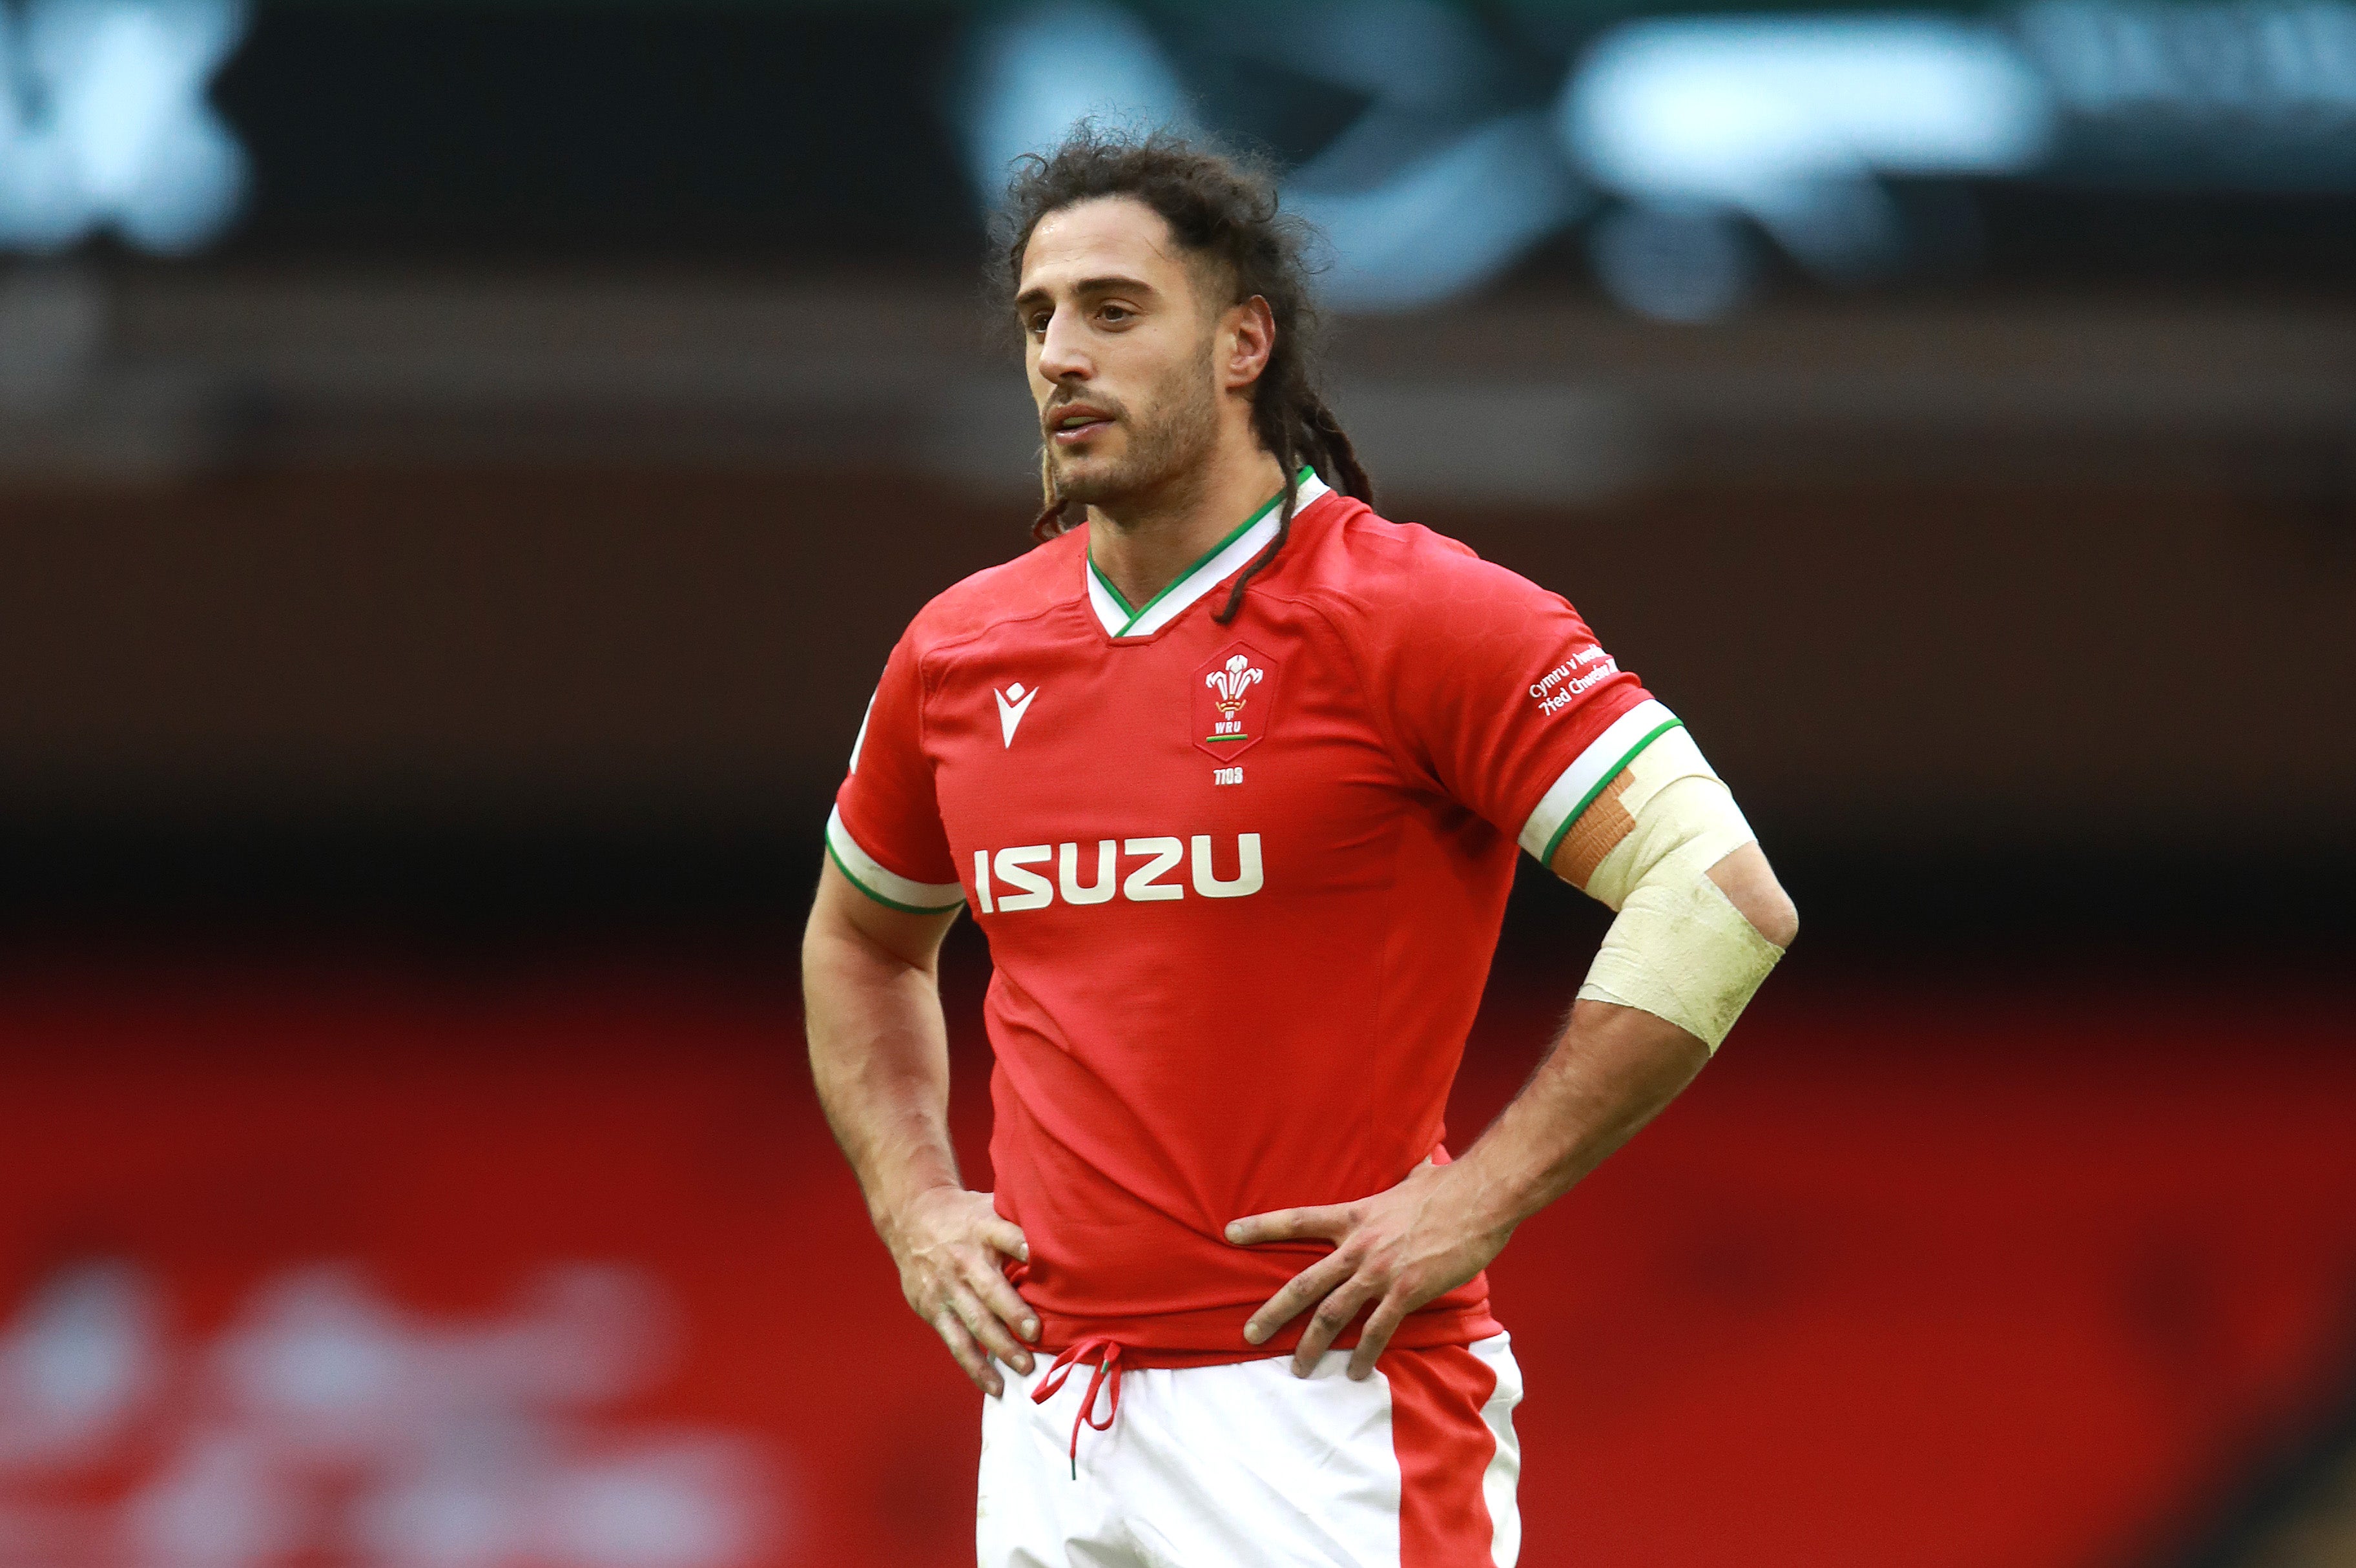 Back-rower Josh Navidi returns to Wales’s starting line-up for the Six Nations game against France